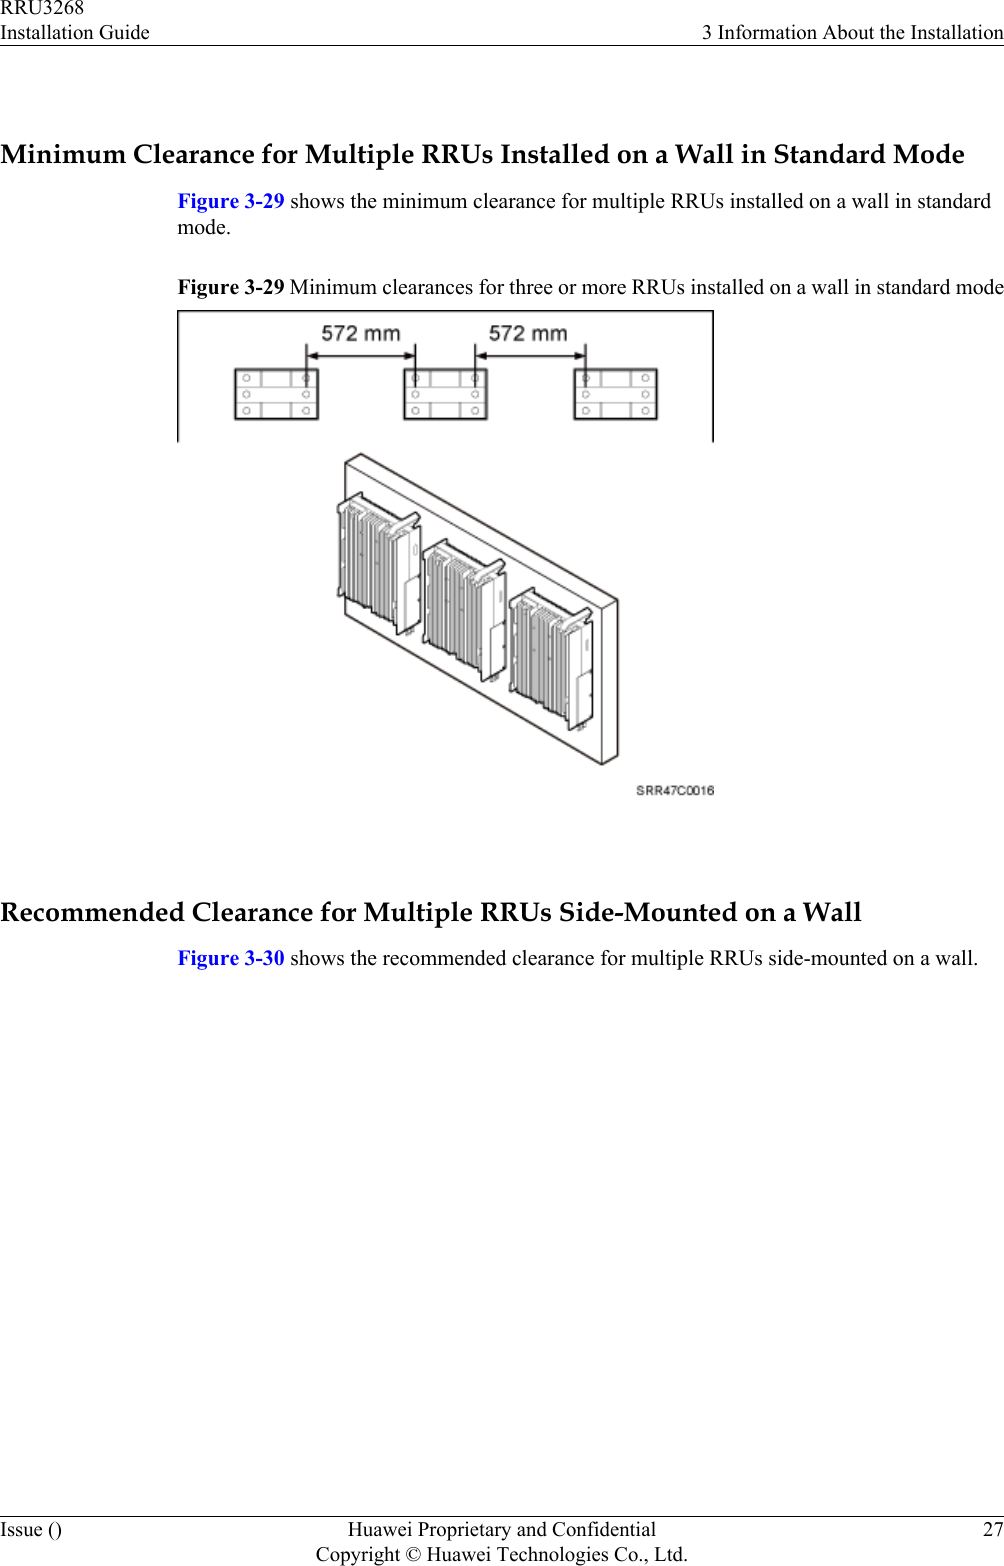  Minimum Clearance for Multiple RRUs Installed on a Wall in Standard ModeFigure 3-29 shows the minimum clearance for multiple RRUs installed on a wall in standardmode.Figure 3-29 Minimum clearances for three or more RRUs installed on a wall in standard mode Recommended Clearance for Multiple RRUs Side-Mounted on a WallFigure 3-30 shows the recommended clearance for multiple RRUs side-mounted on a wall.RRU3268Installation Guide 3 Information About the InstallationIssue () Huawei Proprietary and ConfidentialCopyright © Huawei Technologies Co., Ltd.27